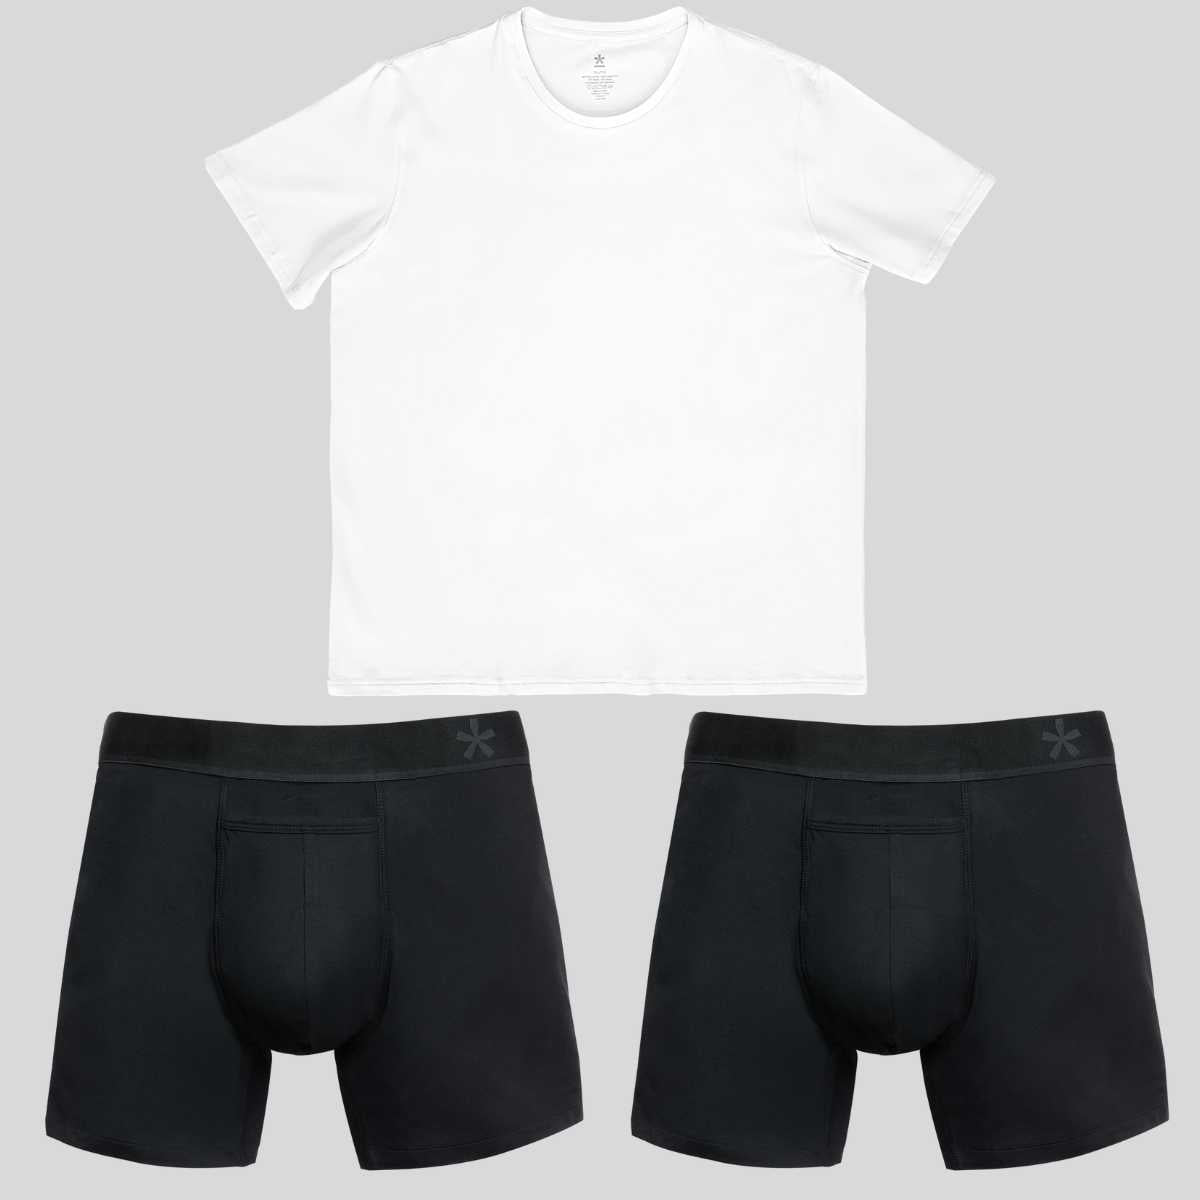 Boxers and T-Shirt Bundle